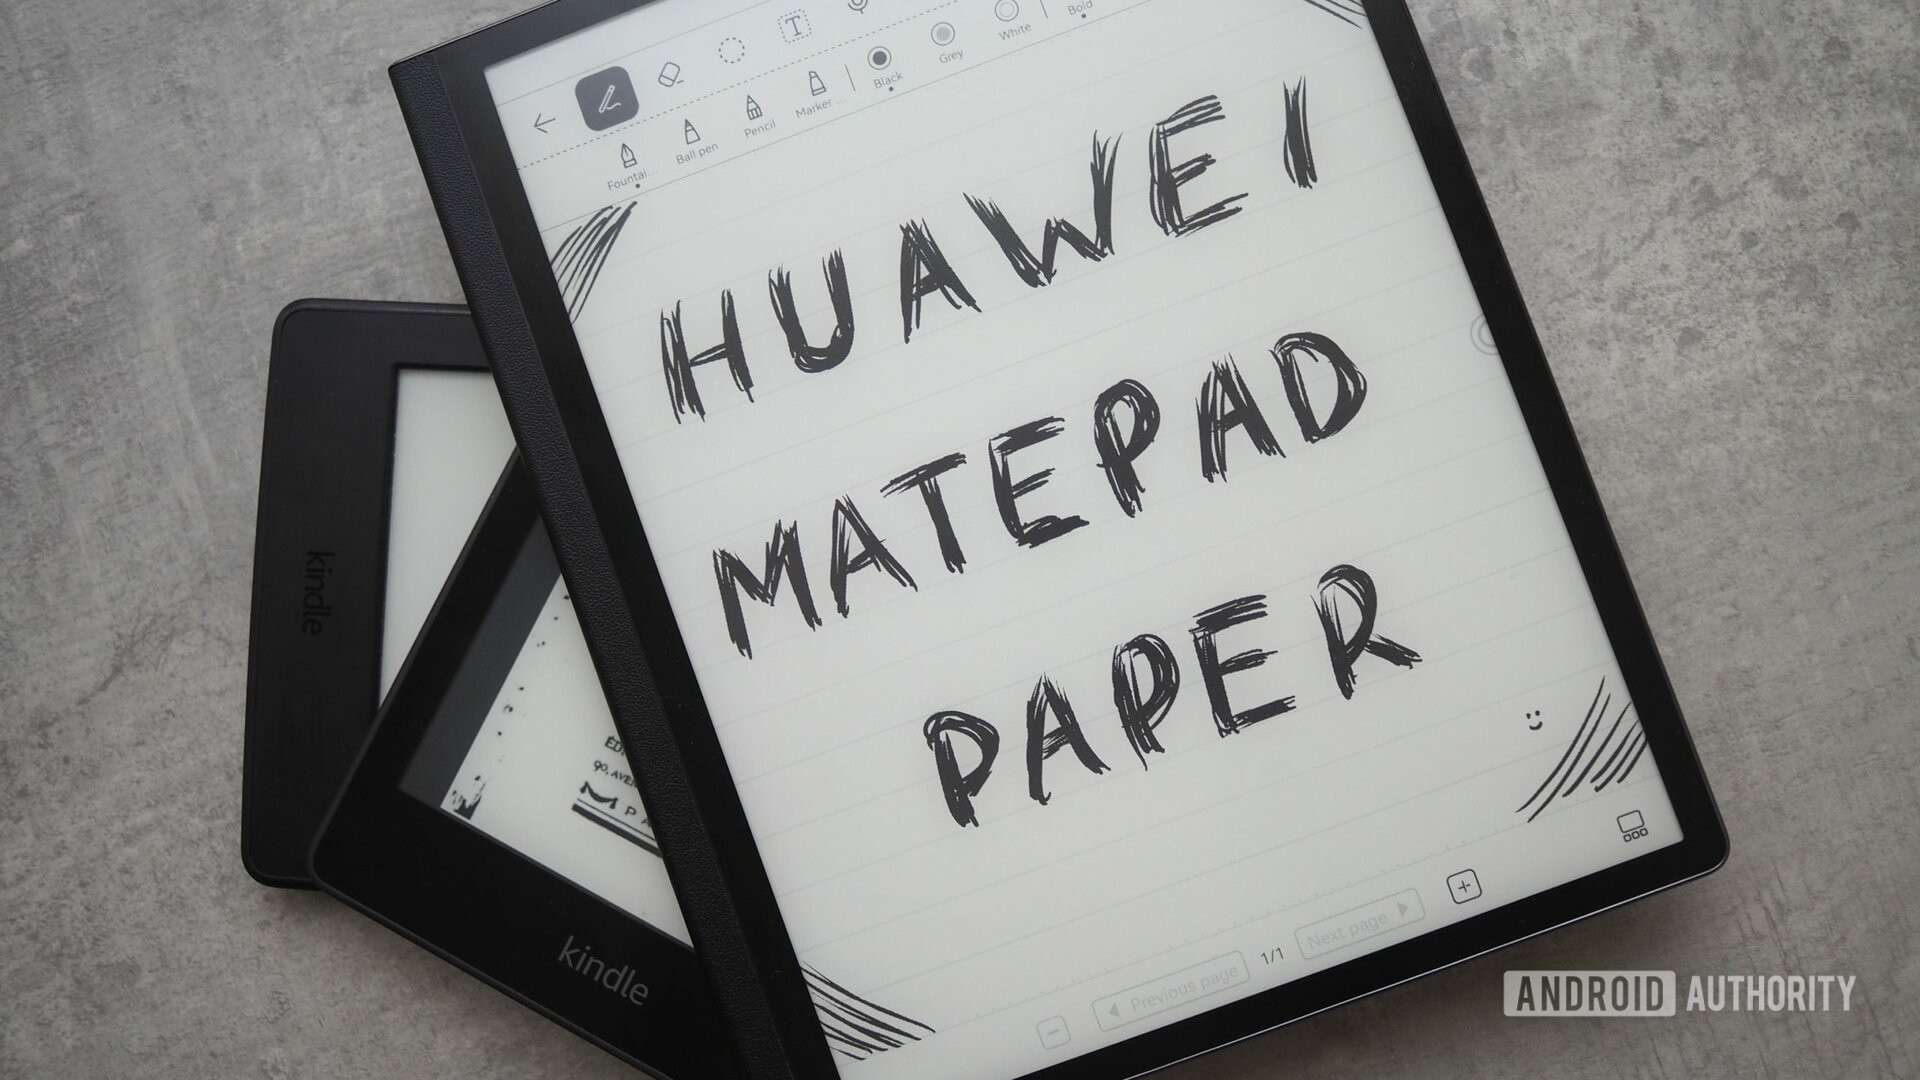 HUAWEI MatePad Paper E-Ink tablets